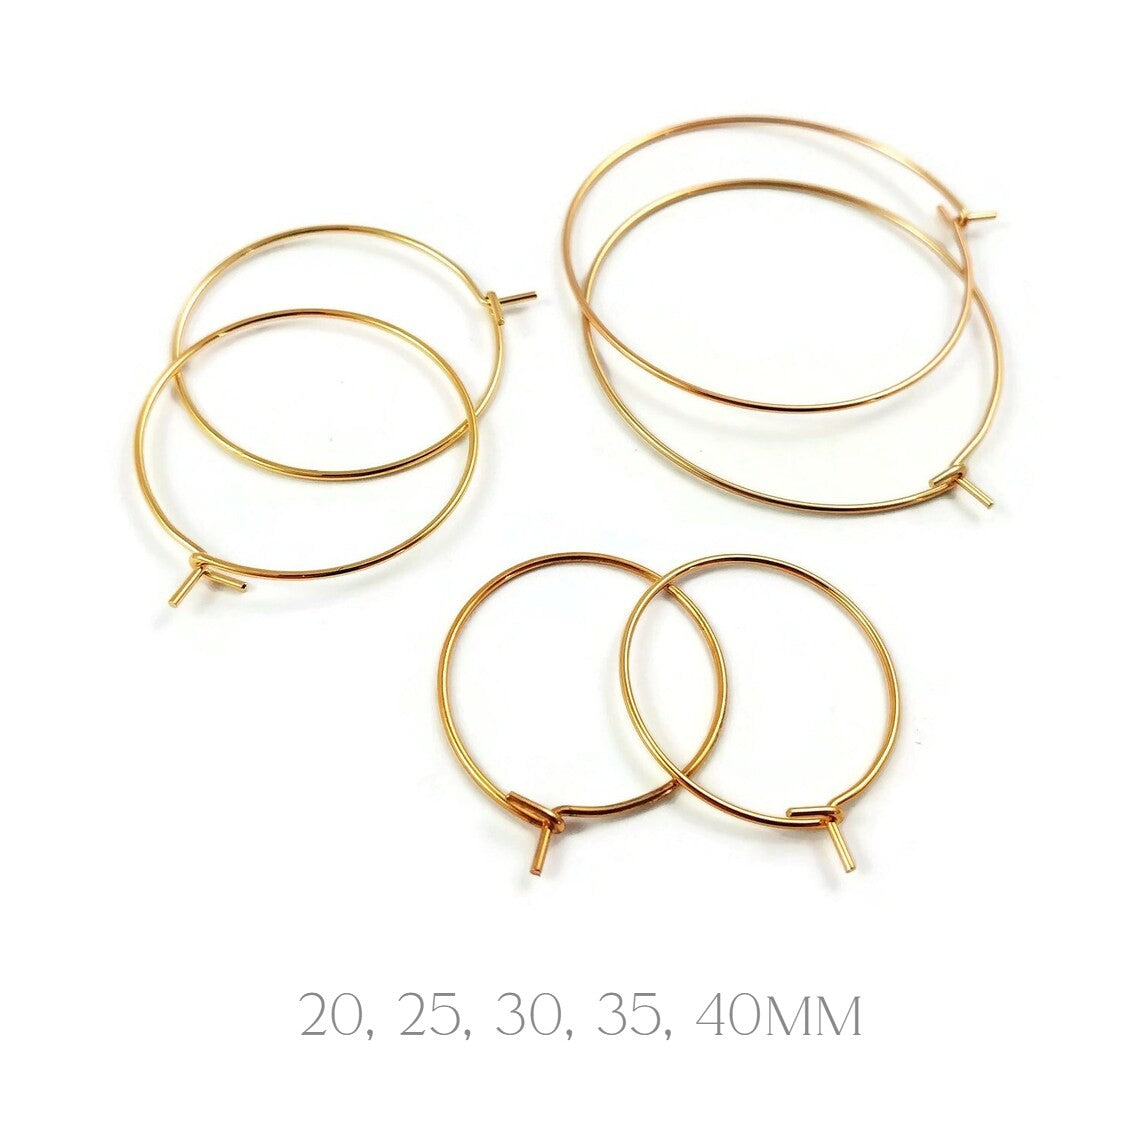 Gold stainless steel hoops 10pcs (5 pairs) - 5 size available